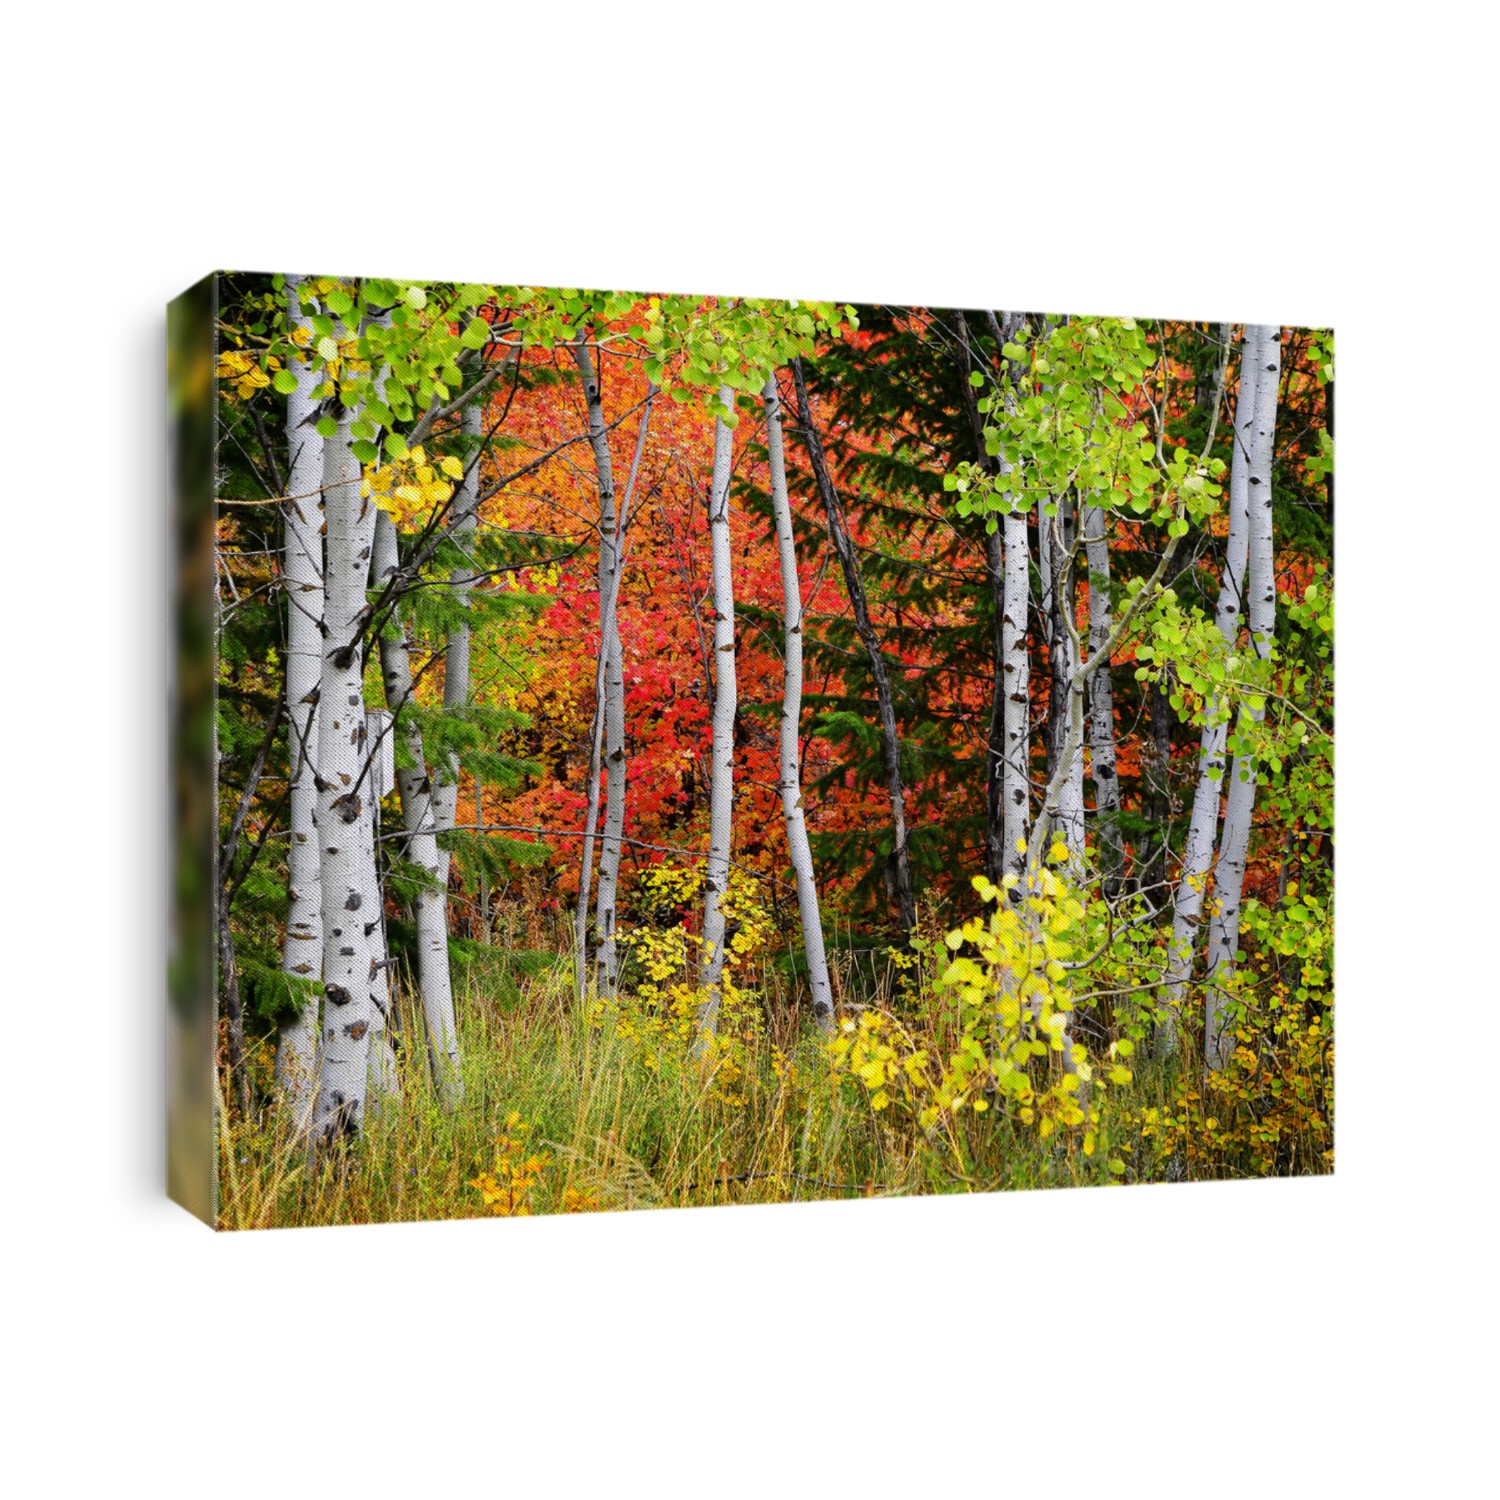 Autumn foliage including birch and maple trees with pine forest